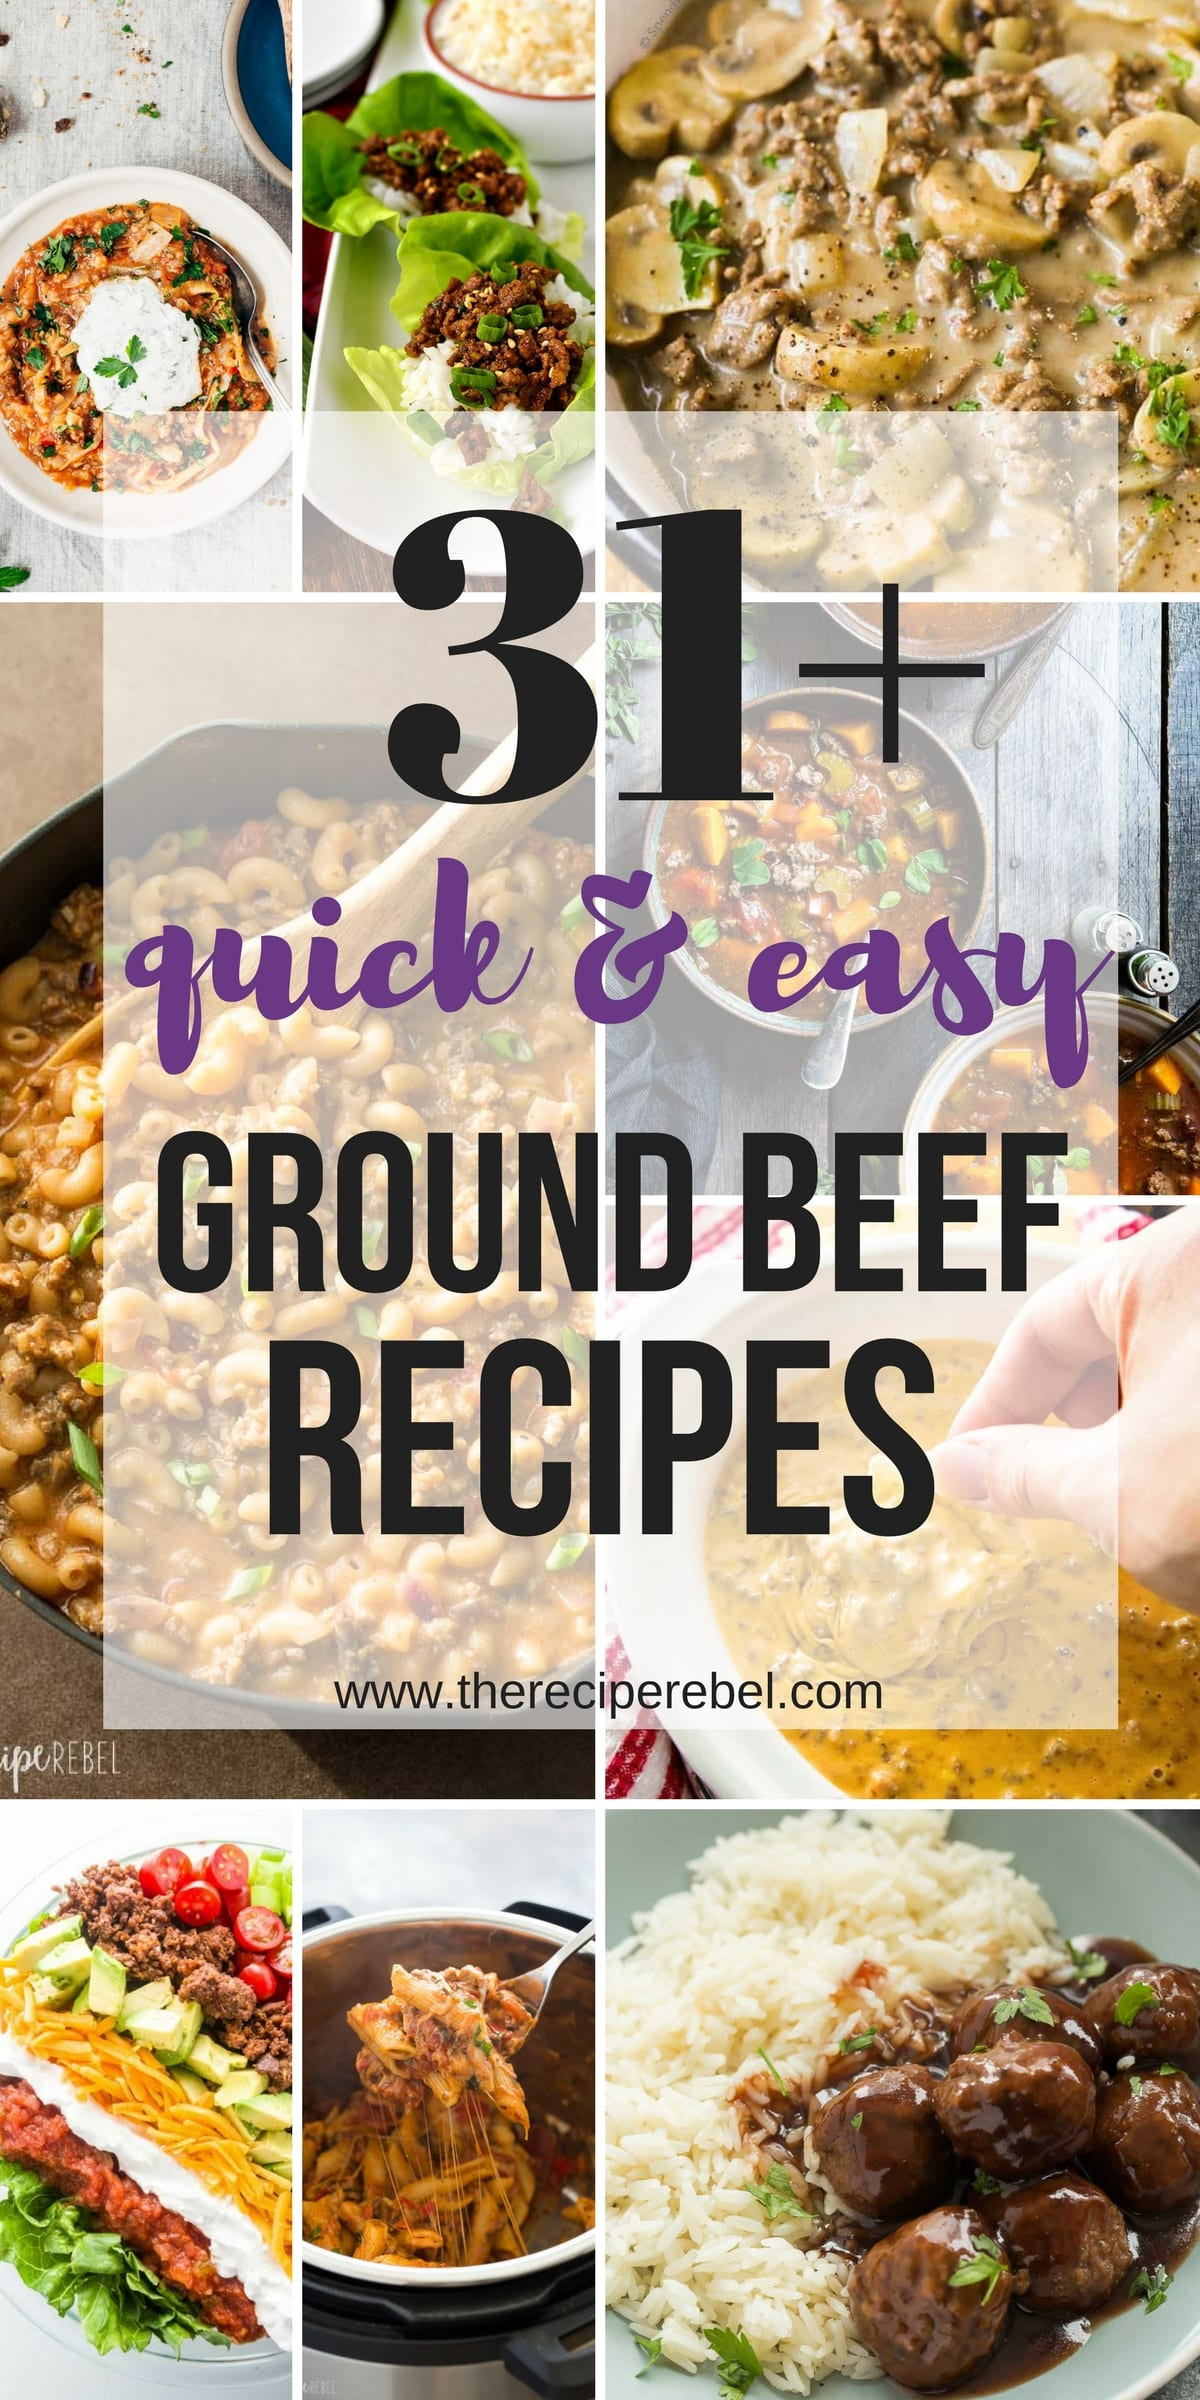 Quick Healthy Ground Beef Recipes
 31 Quick Ground Beef Recipes easy family friendly